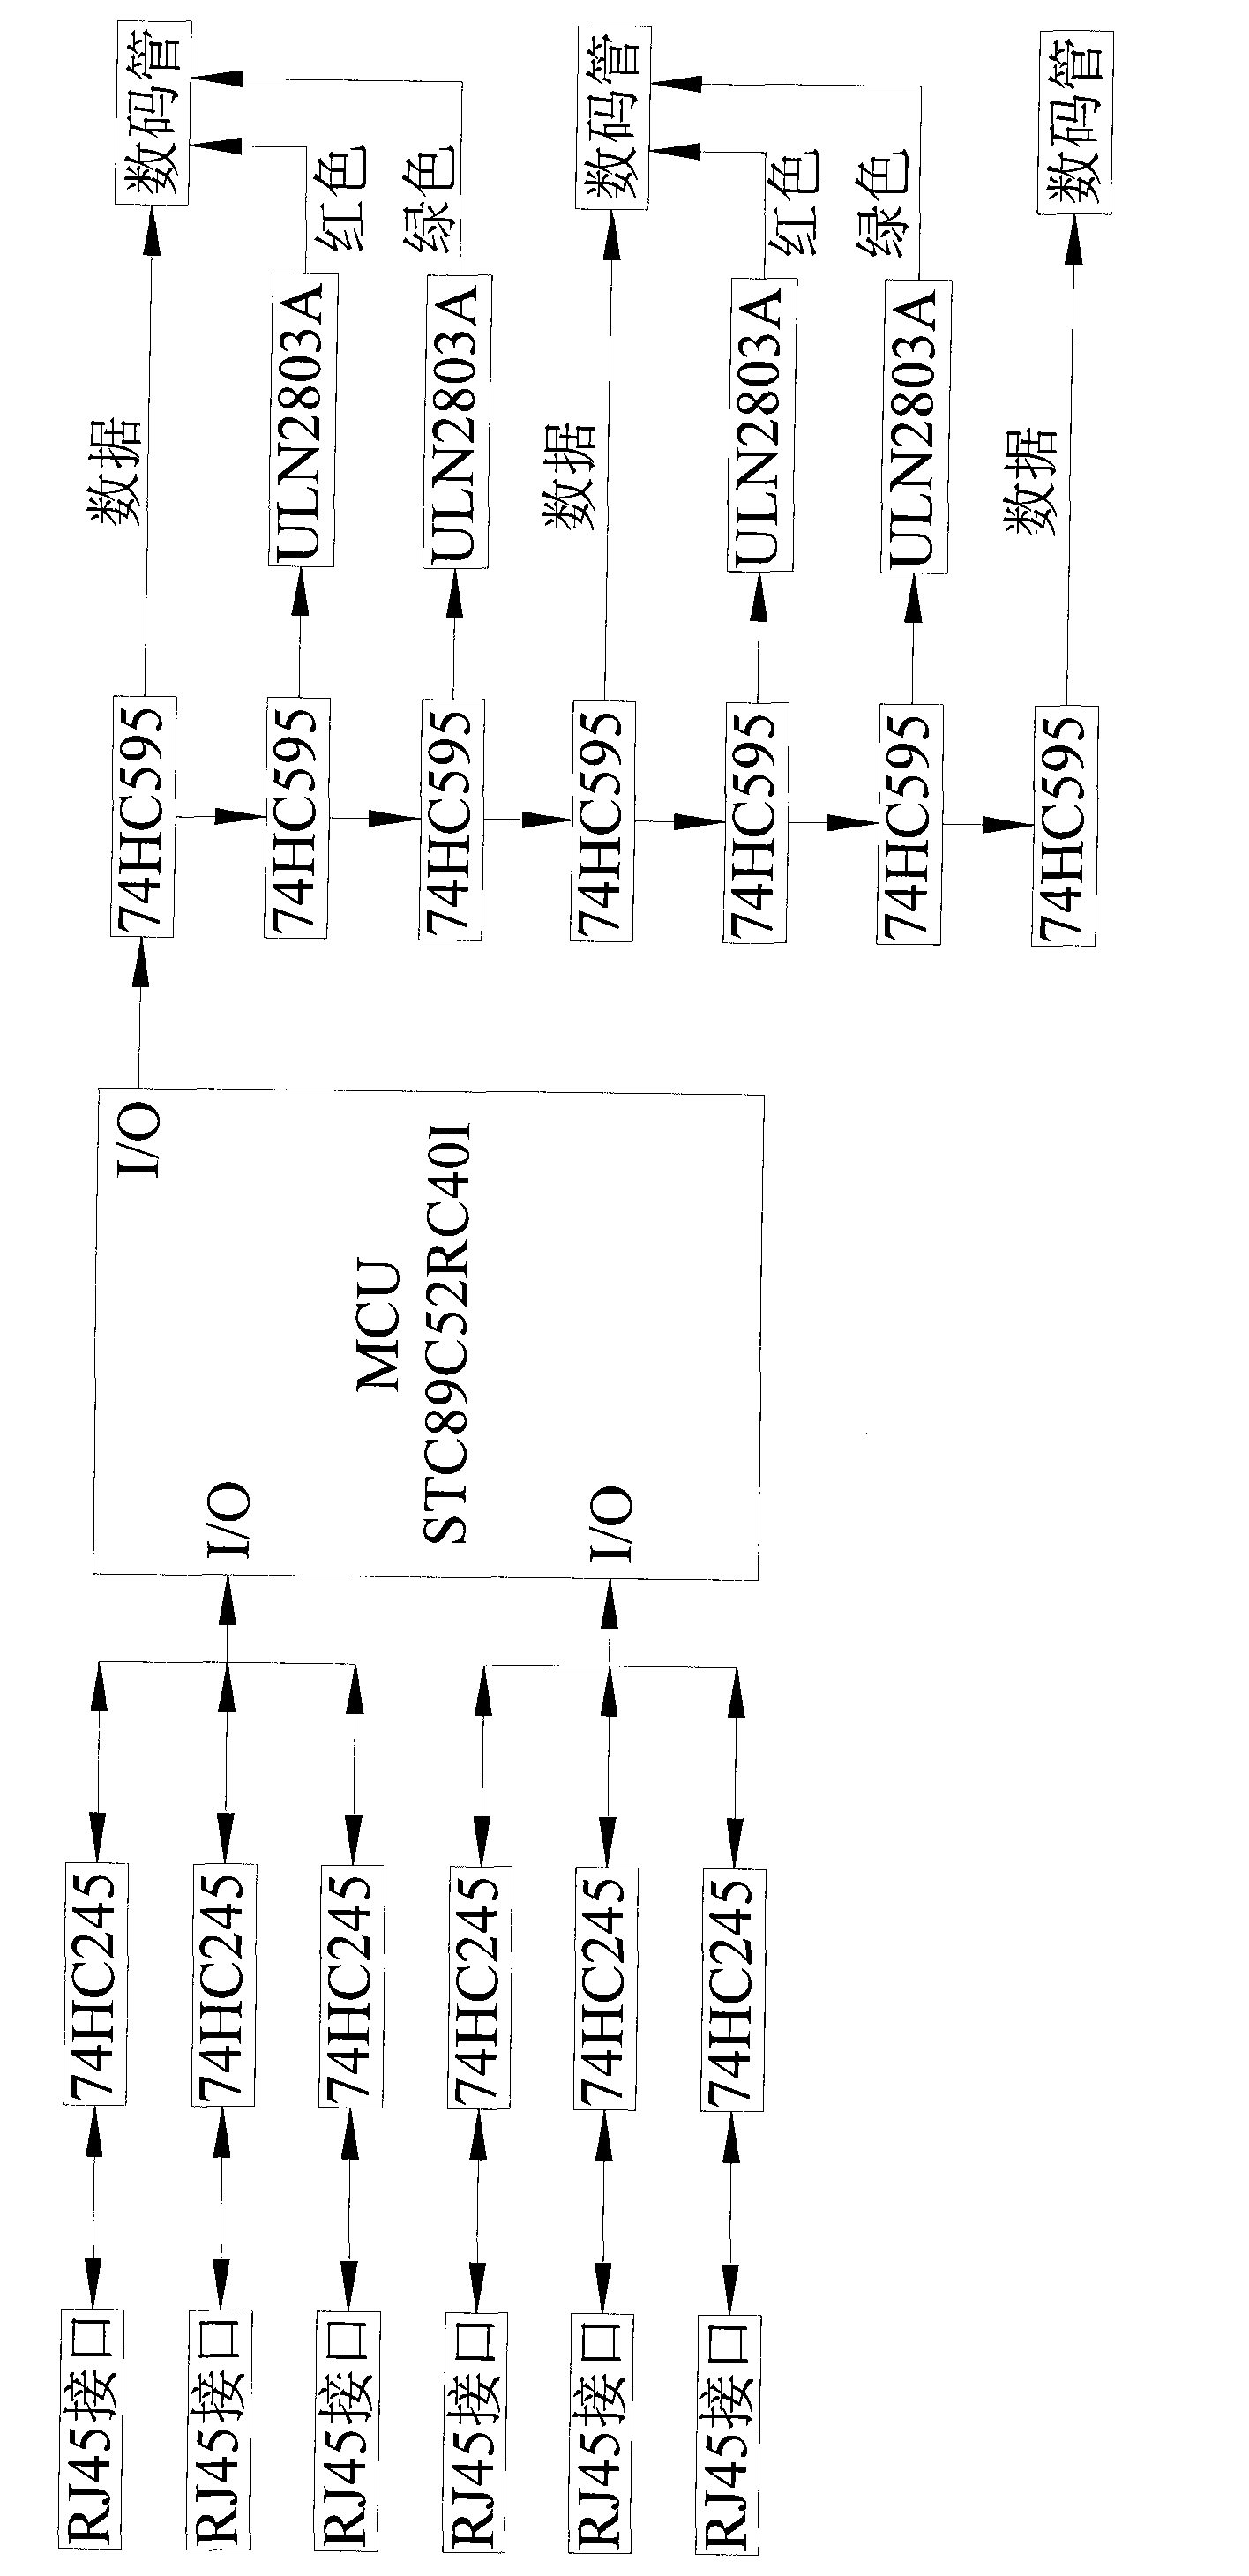 Digital display twisted-pair termination detecting device